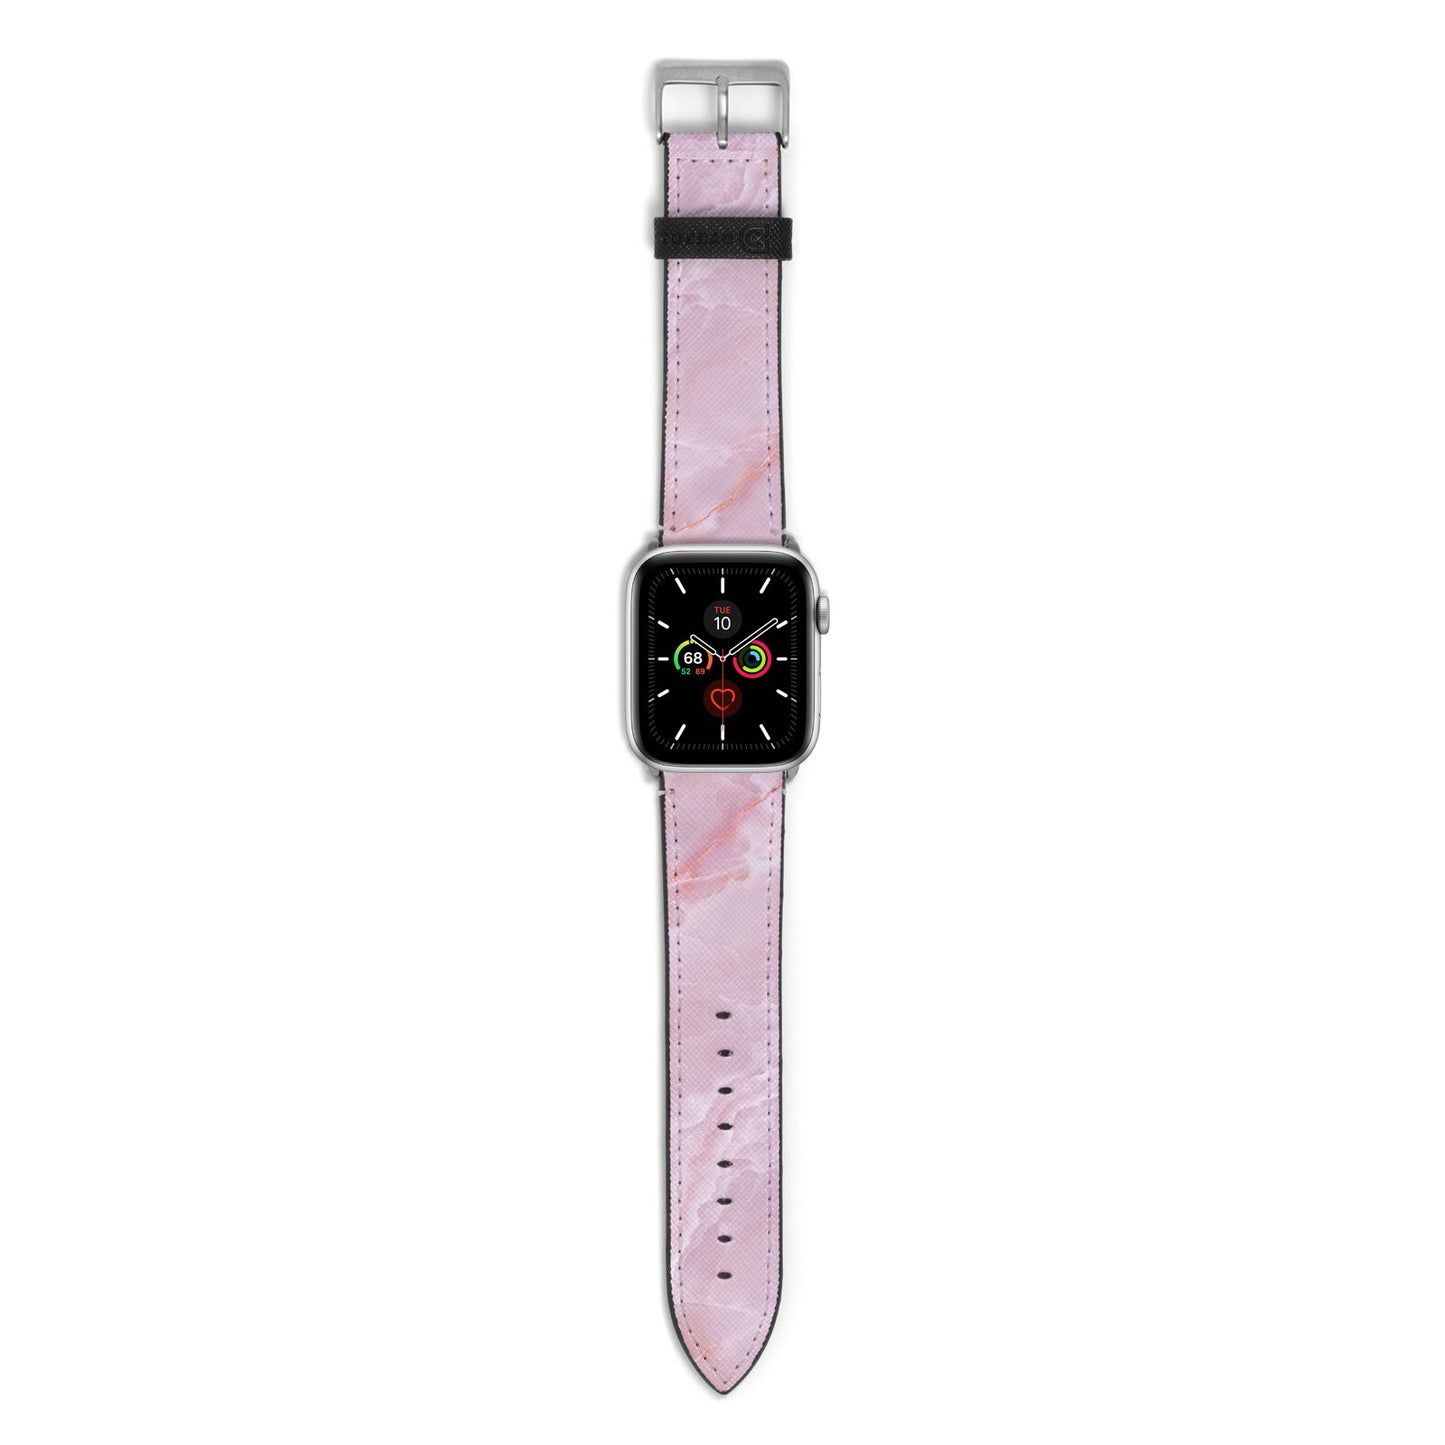 Dreamy Pink Marble Apple Watch Strap with Silver Hardware